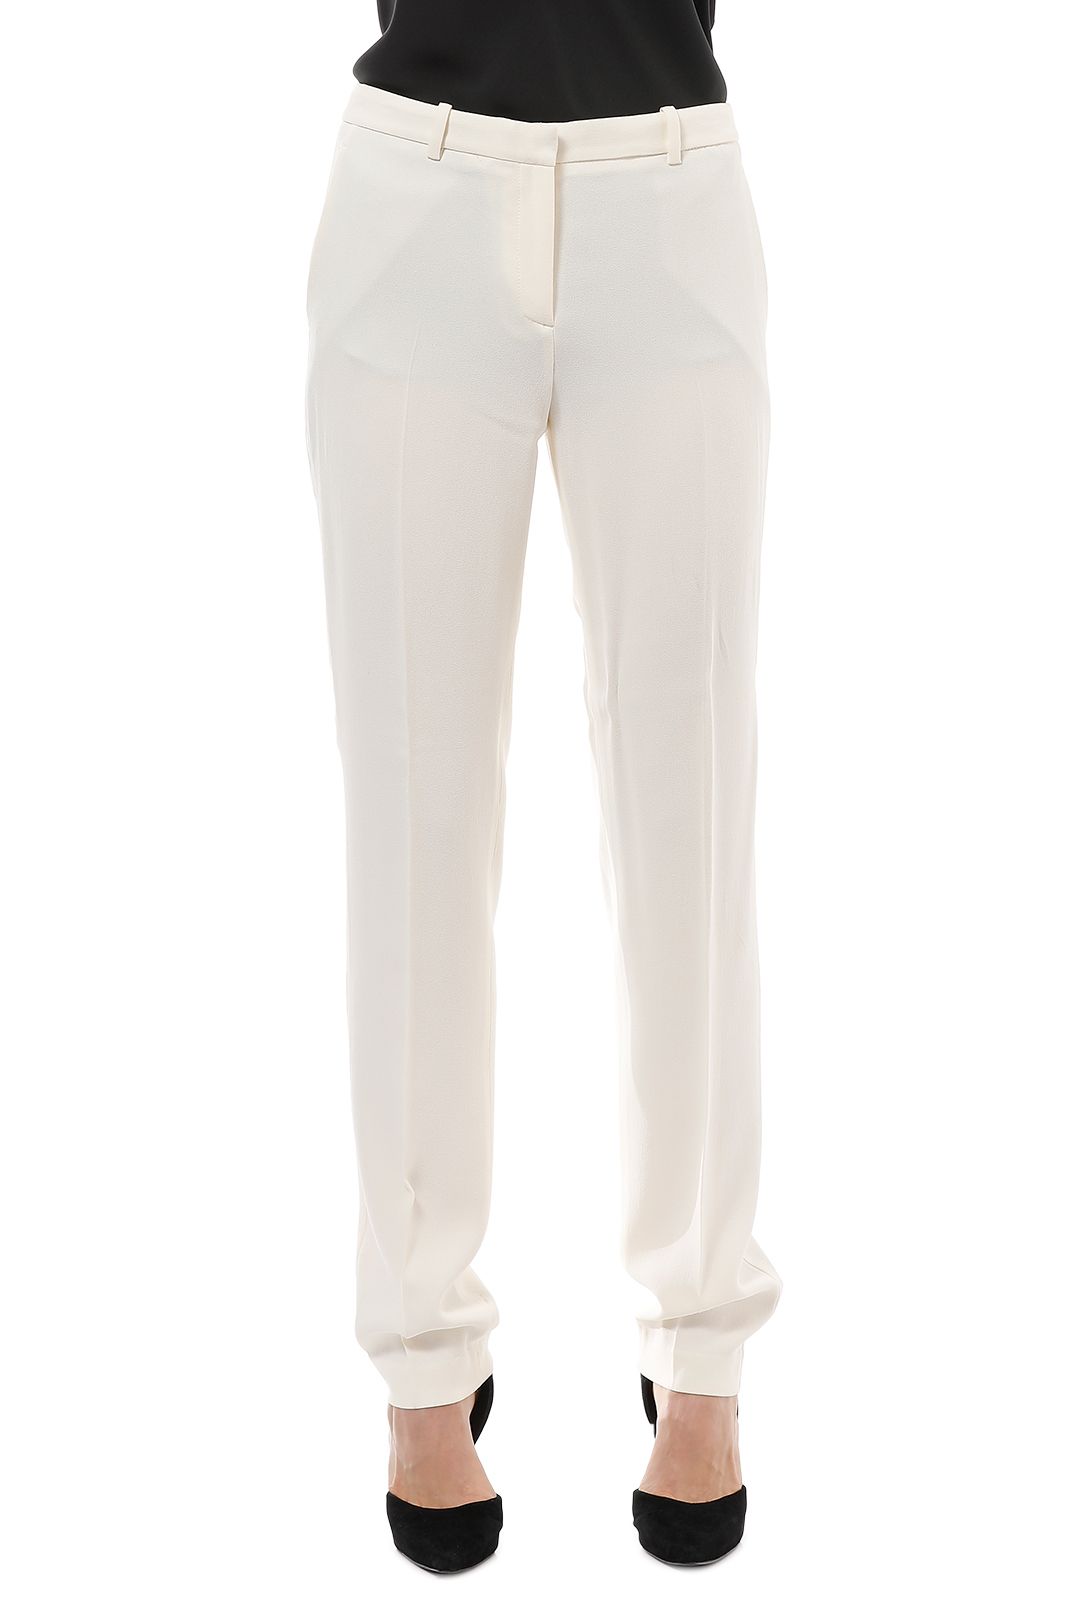 Theory - Elfinis Pant - Ivory - Front Crop